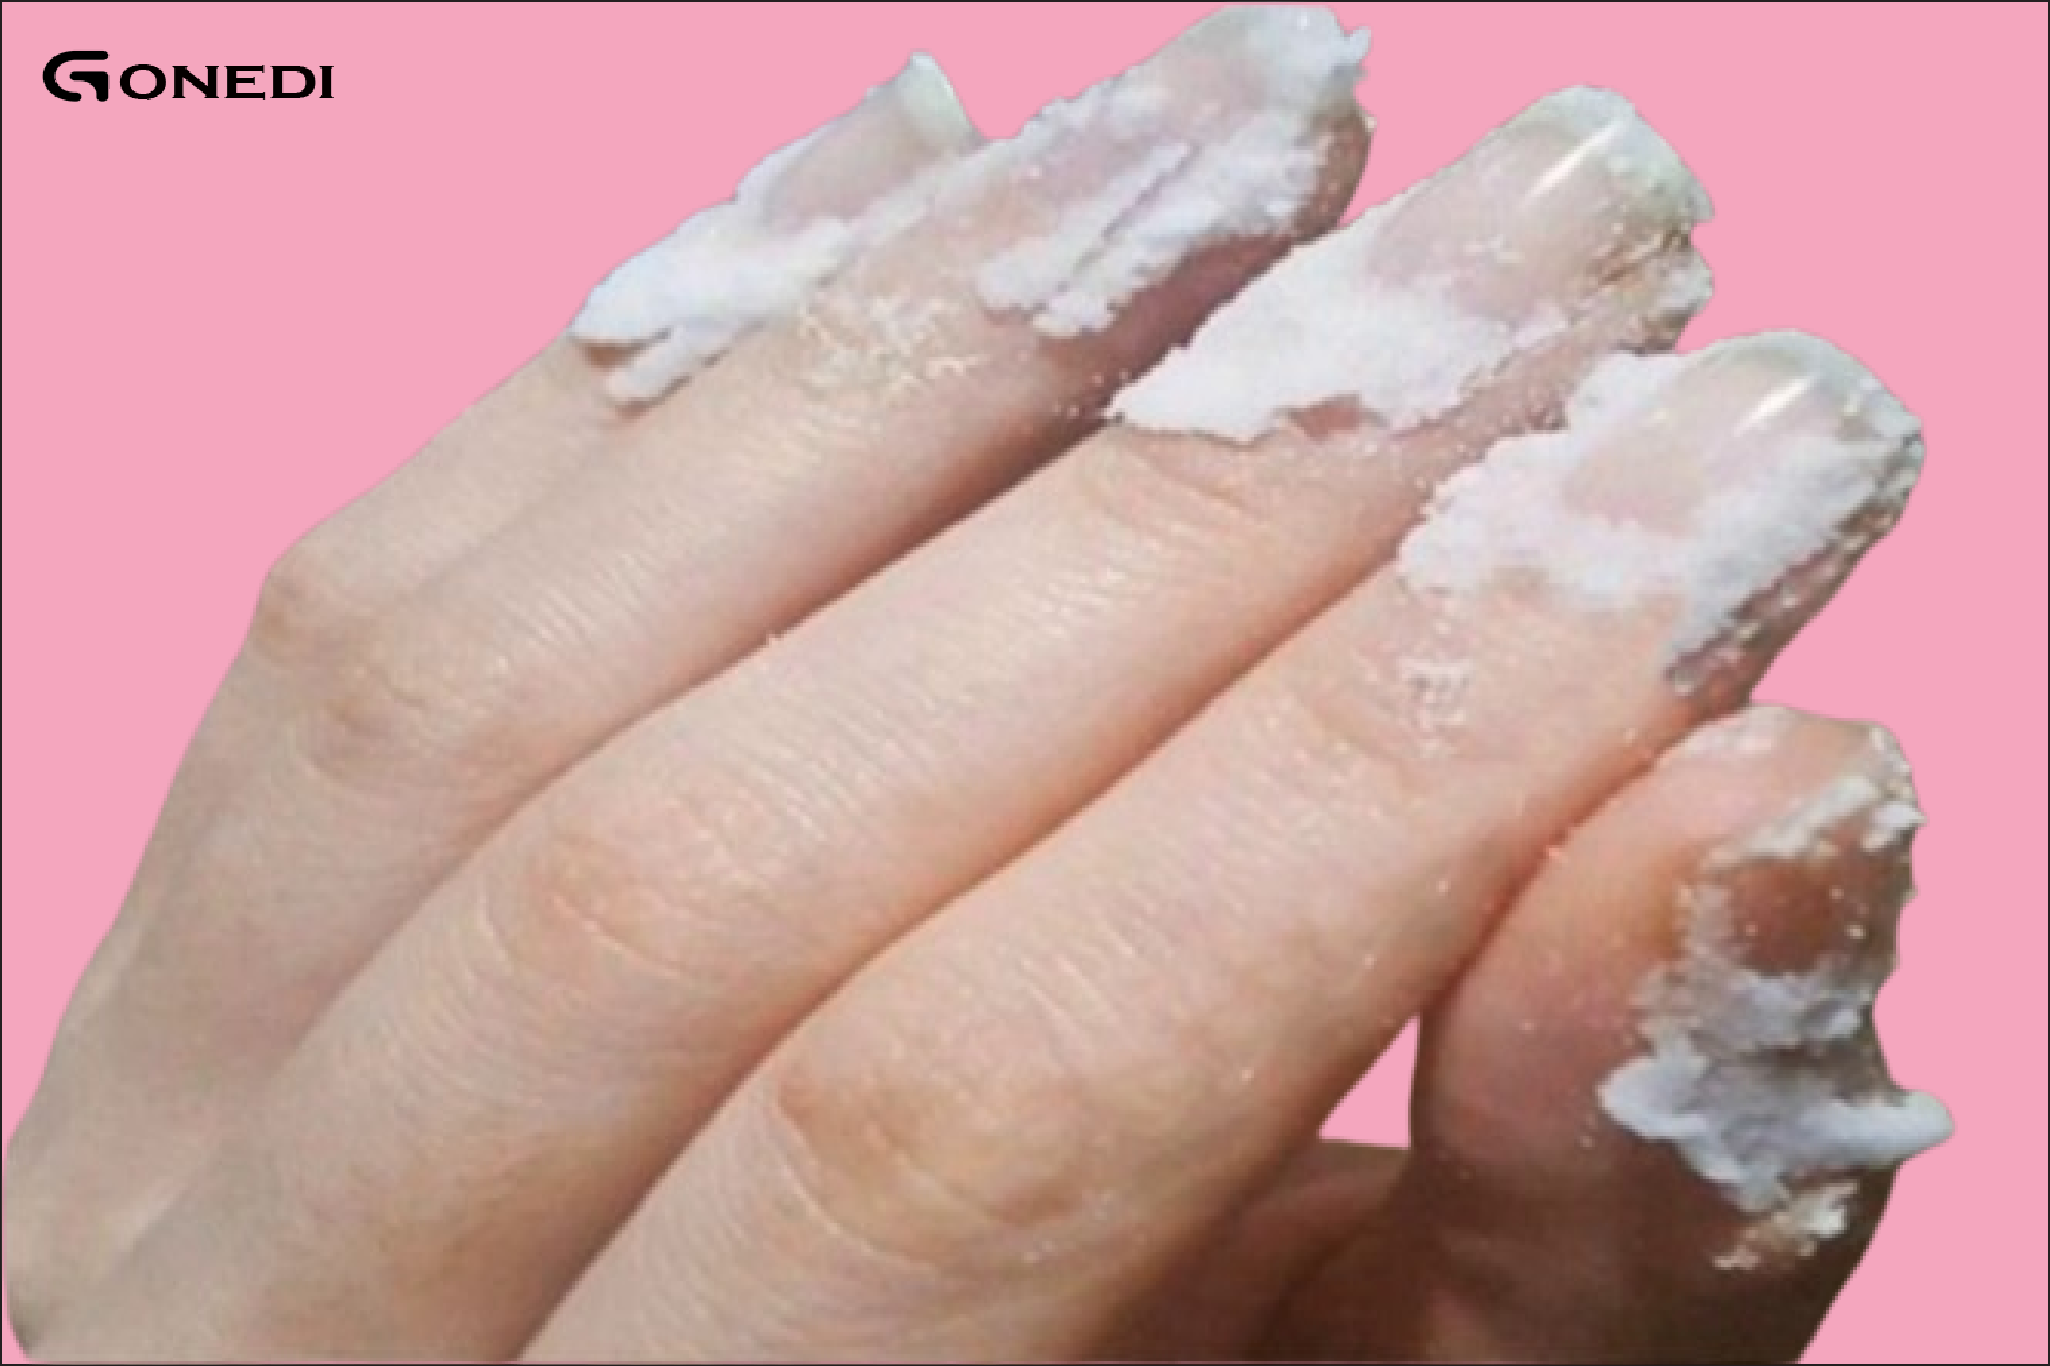 Rub some baking soda on your nails and see what happens?